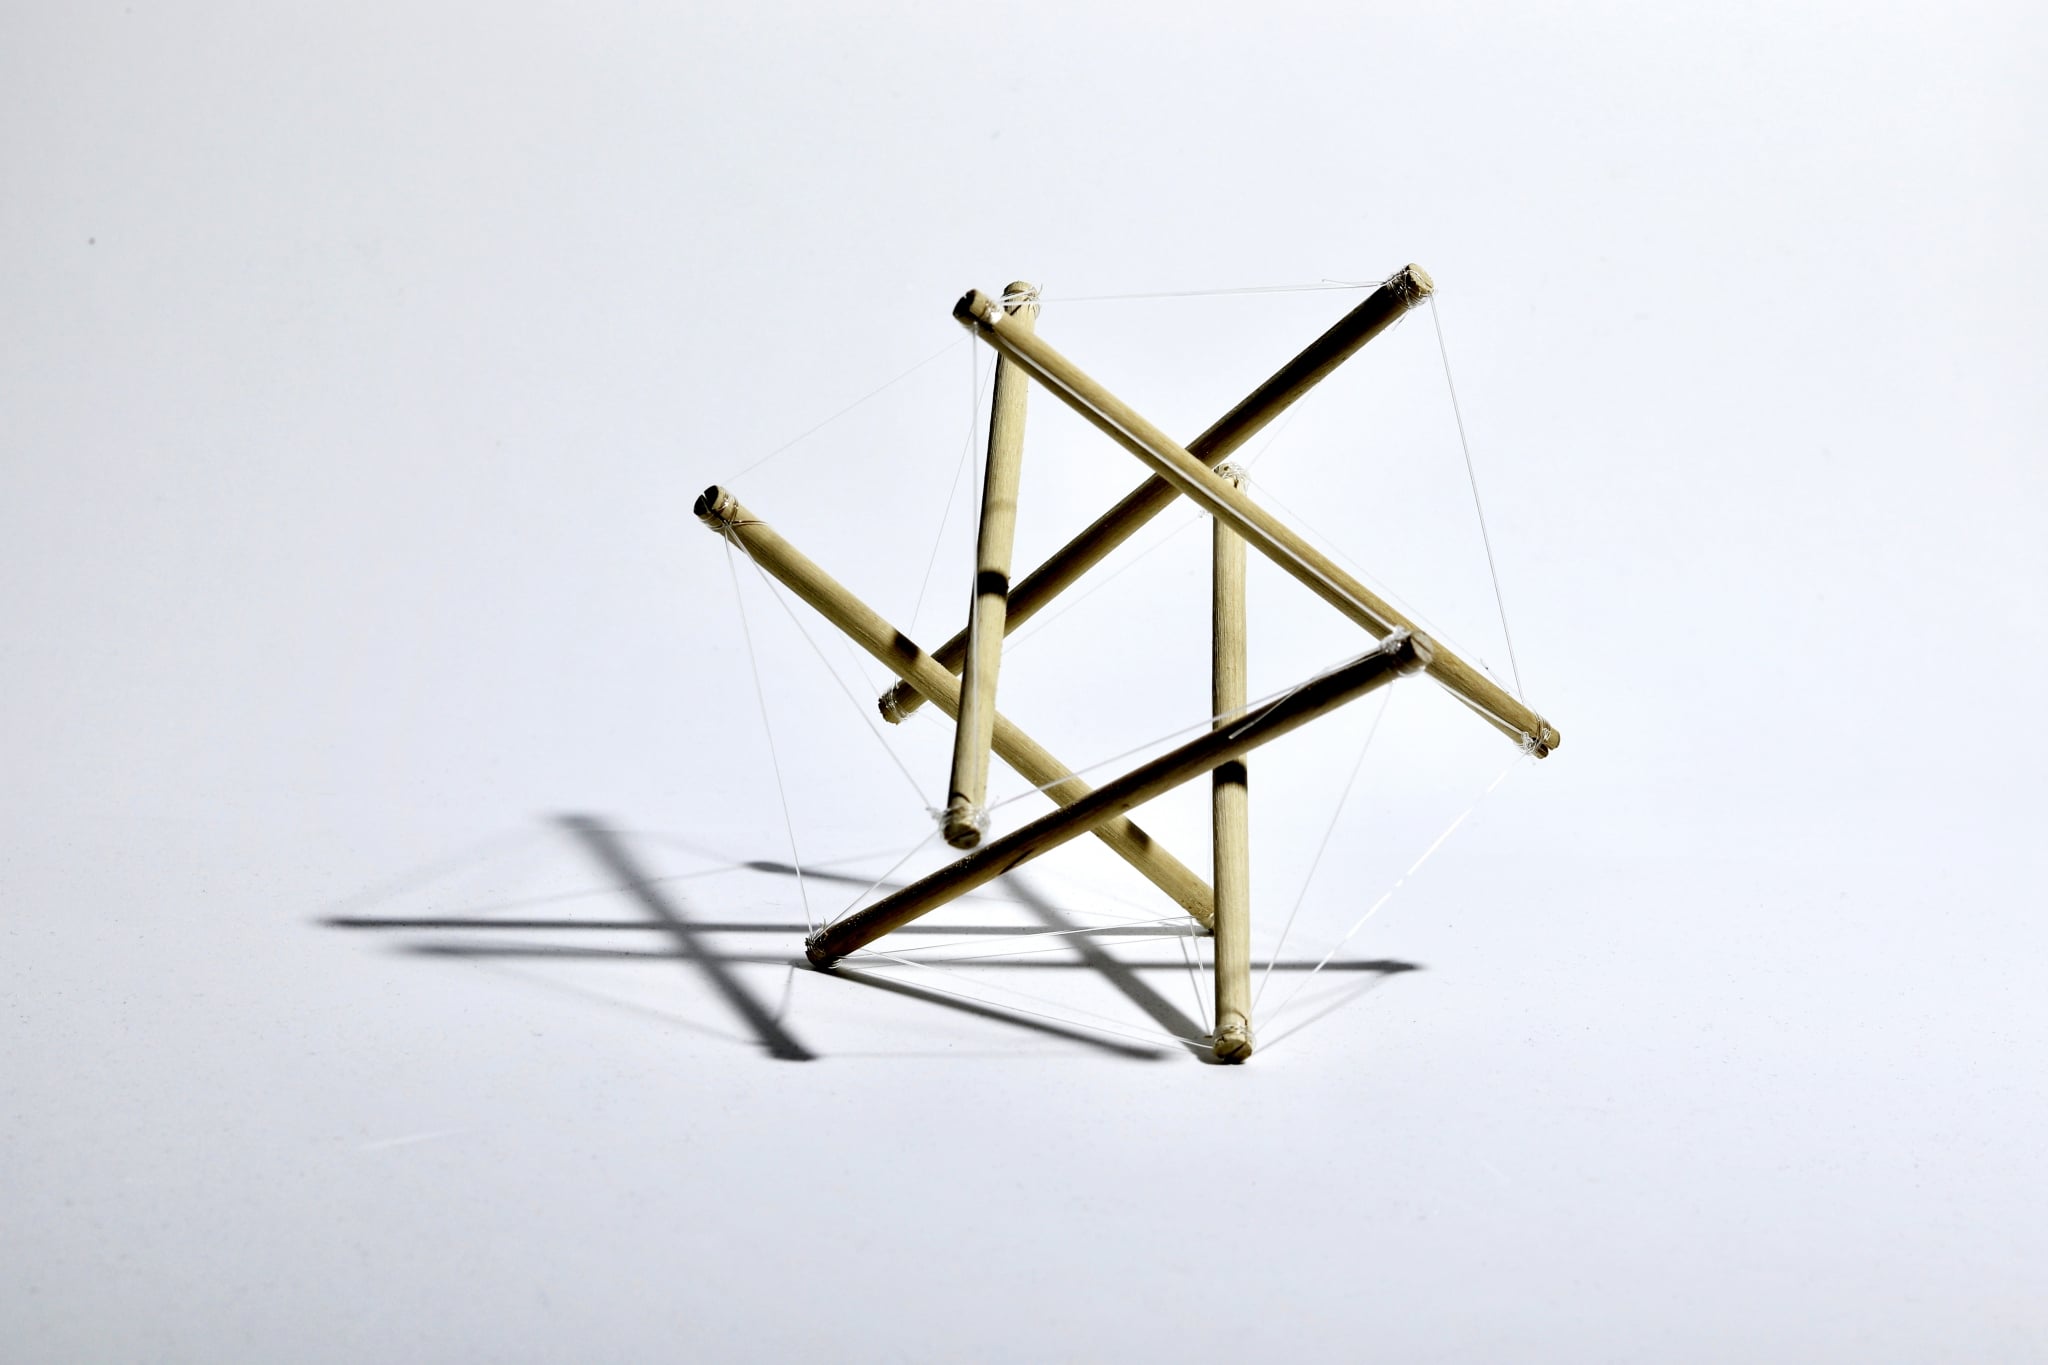 8 Examples of Tensegrity That Almost Defy Gravity